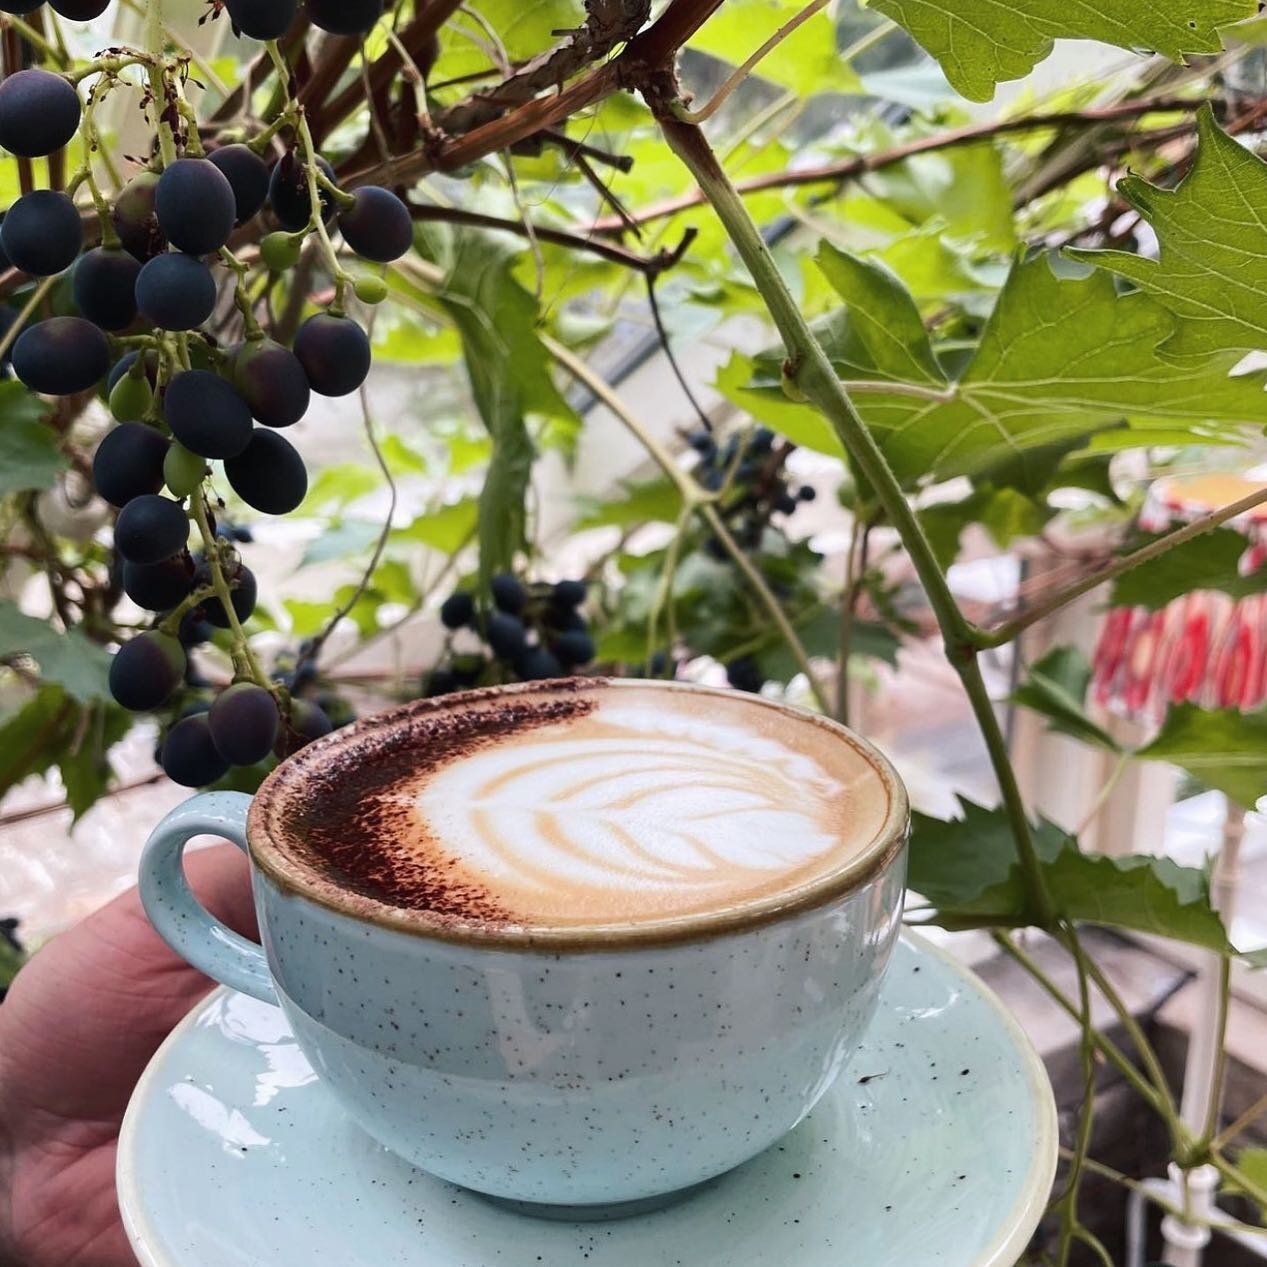 ᴄᴏғғᴇᴇ sᴛᴏᴘ. 

Whether you have just enjoyed a walk up to Nicky Nook or have ahead a leisurely stroll around our grounds and artisan retailers, we are the perfect place to stop for a delicious cup of coffee &amp; even a sweet treat! 
.
.
.
.
.
#wyres